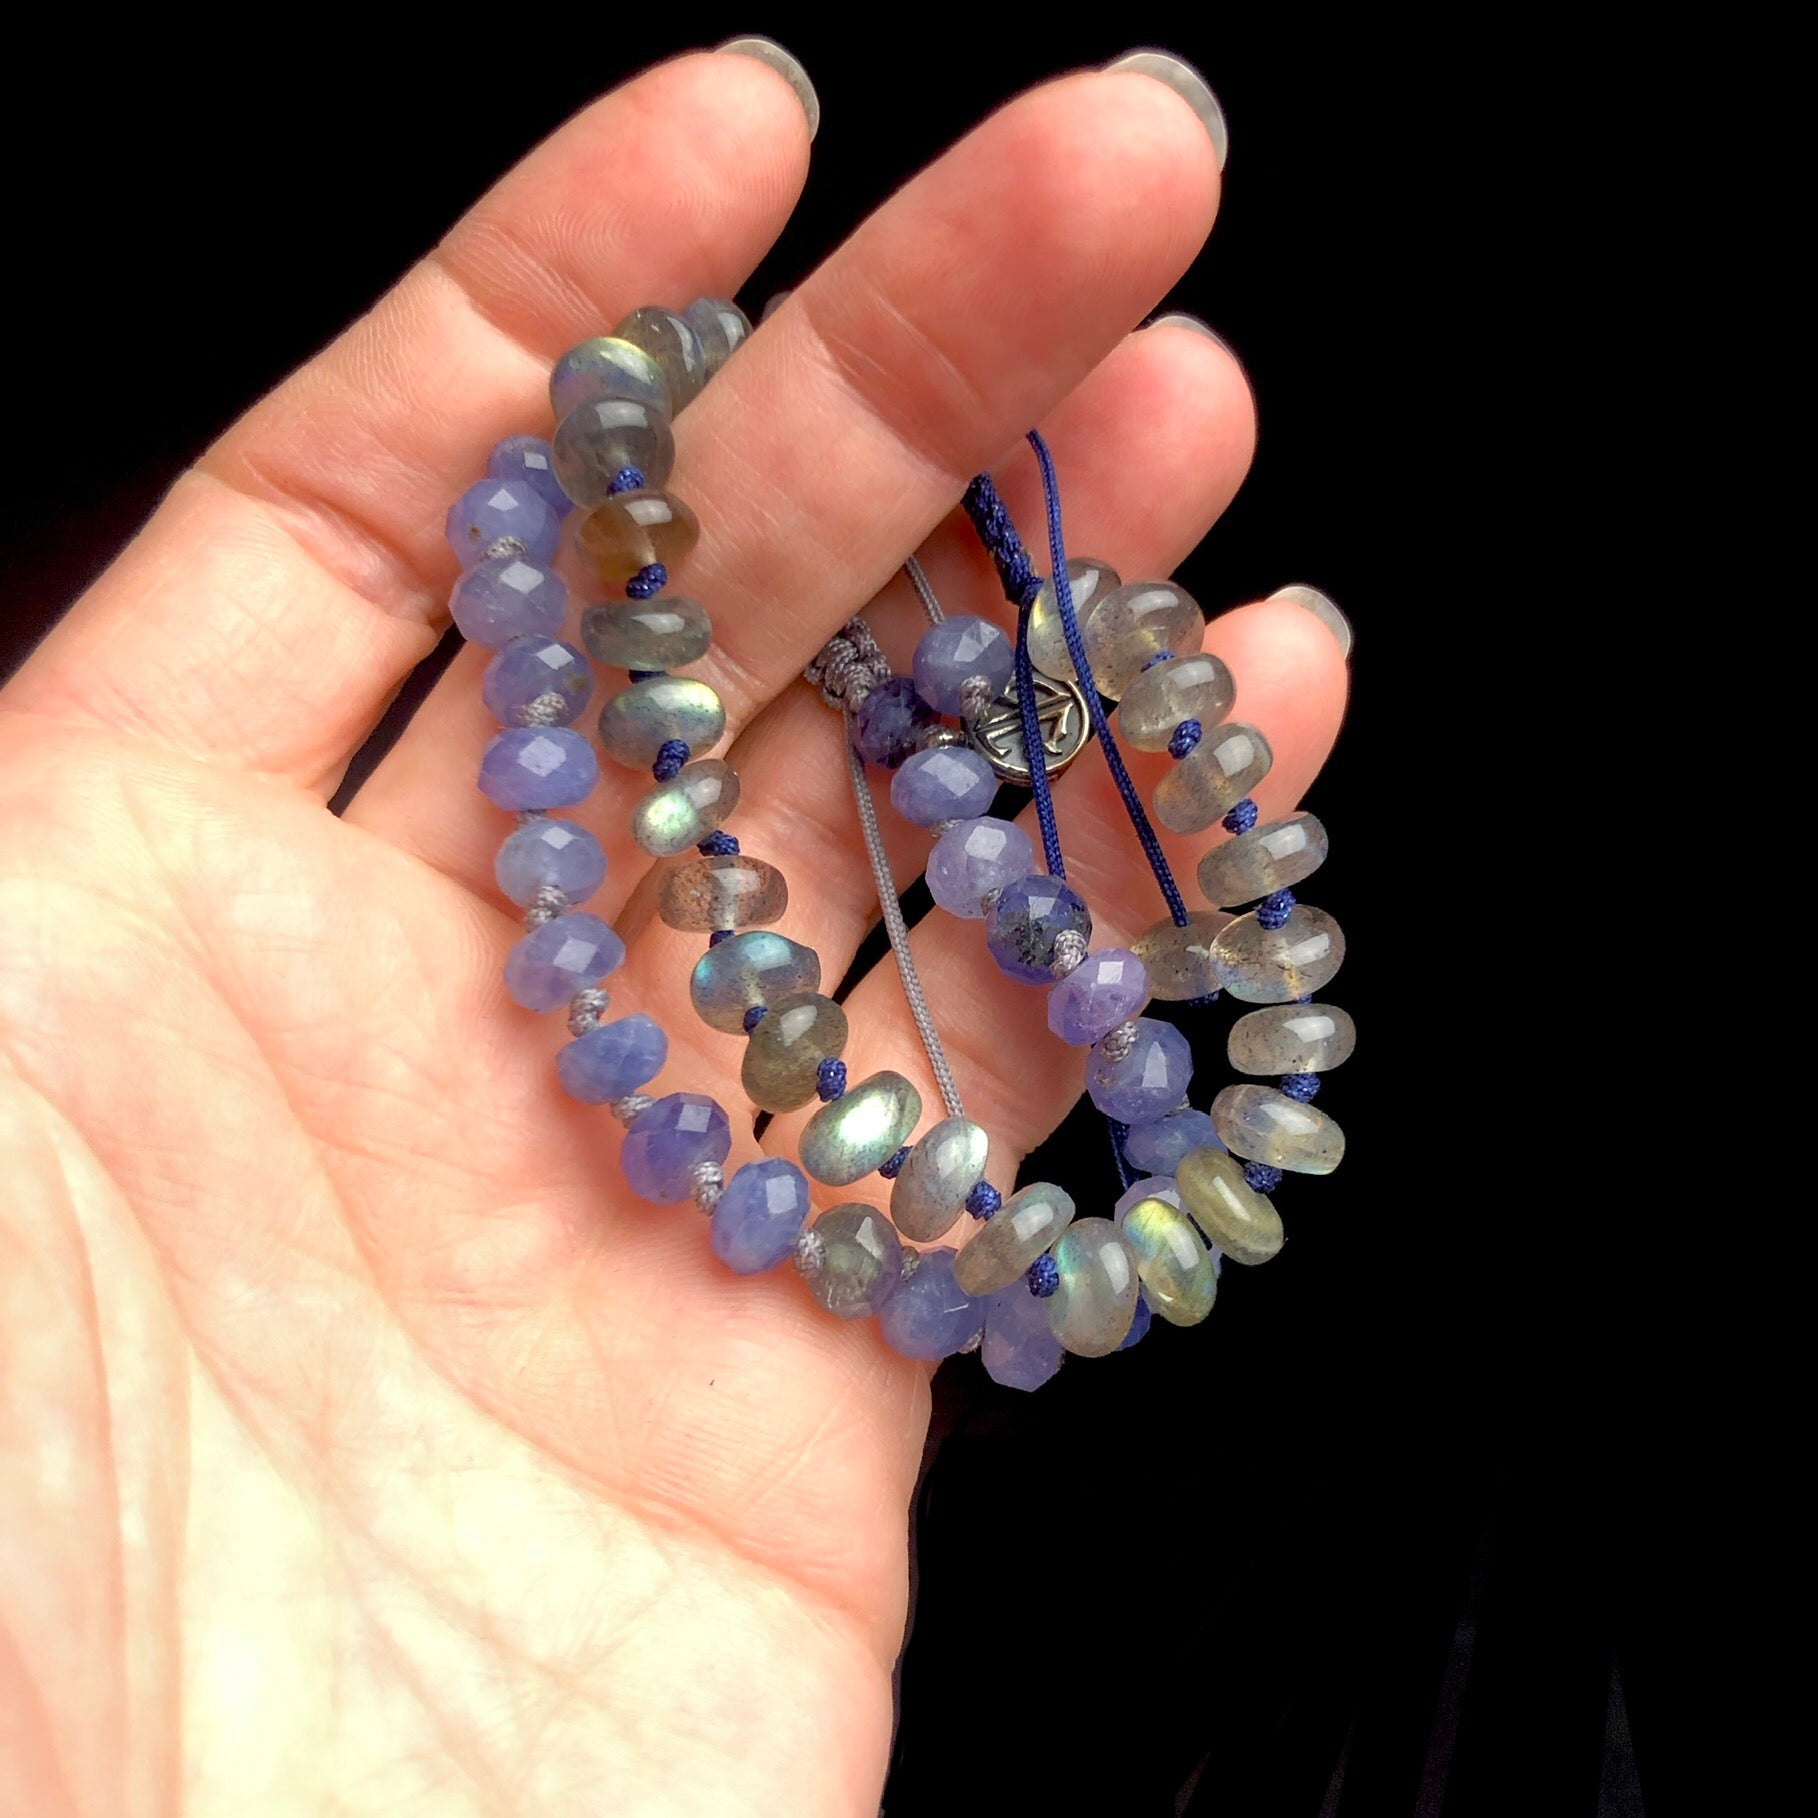 Translucent iridescent grey, blue and green colored stone bracelet with light purple knotted bracelet shown in hand 